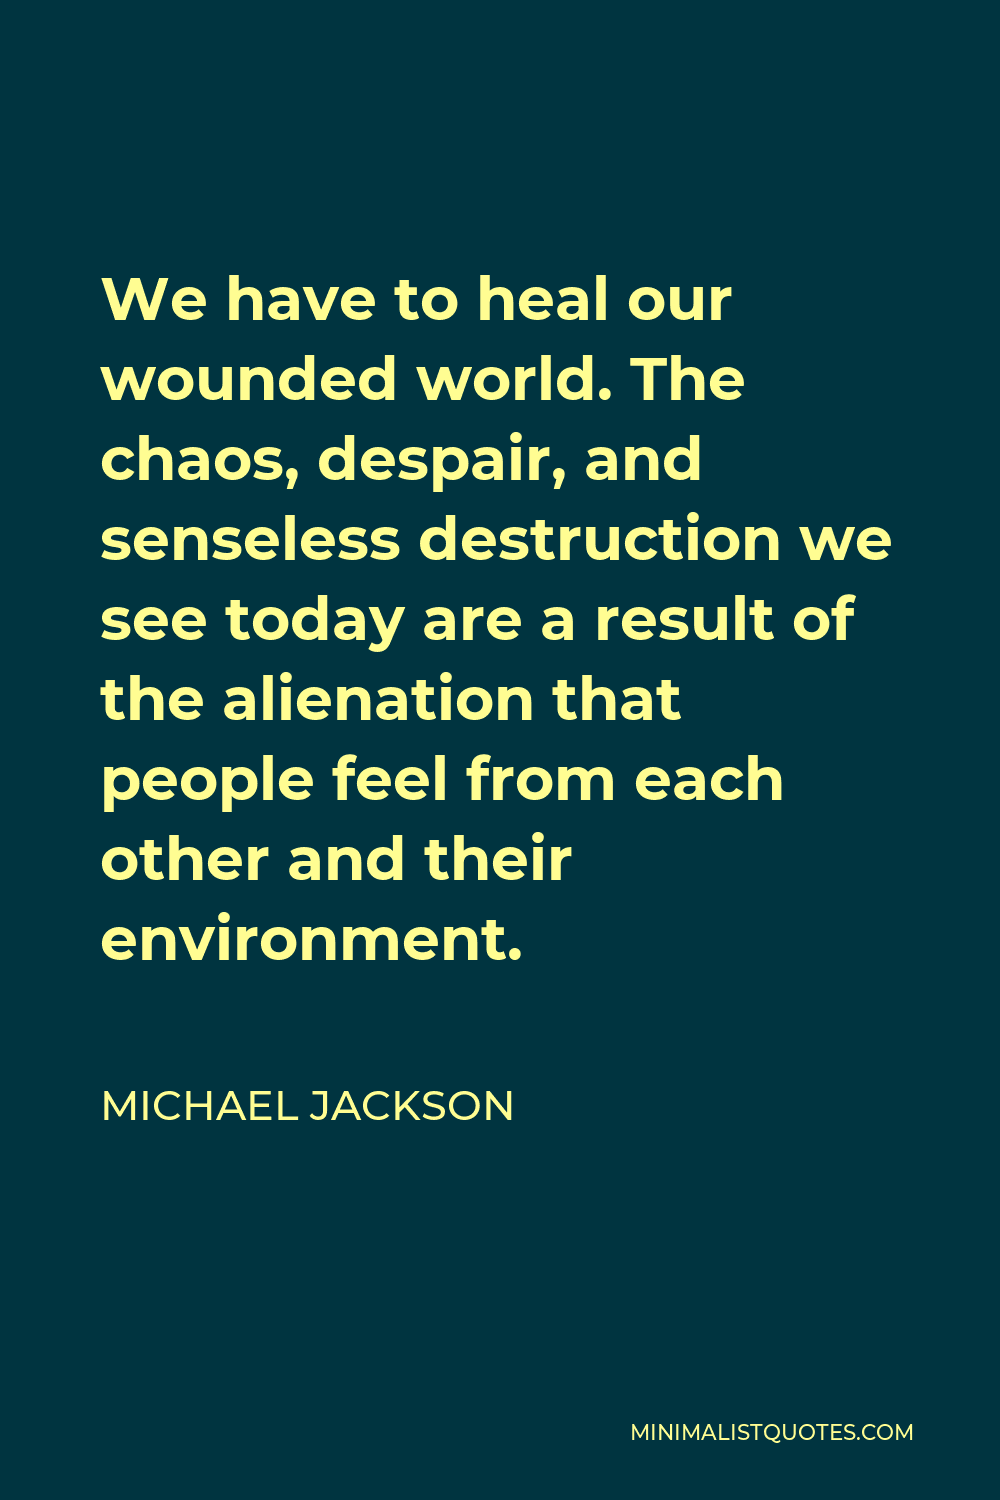 Michael Jackson Quote - We have to heal our wounded world. The chaos, despair, and senseless destruction we see today are a result of the alienation that people feel from each other and their environment.